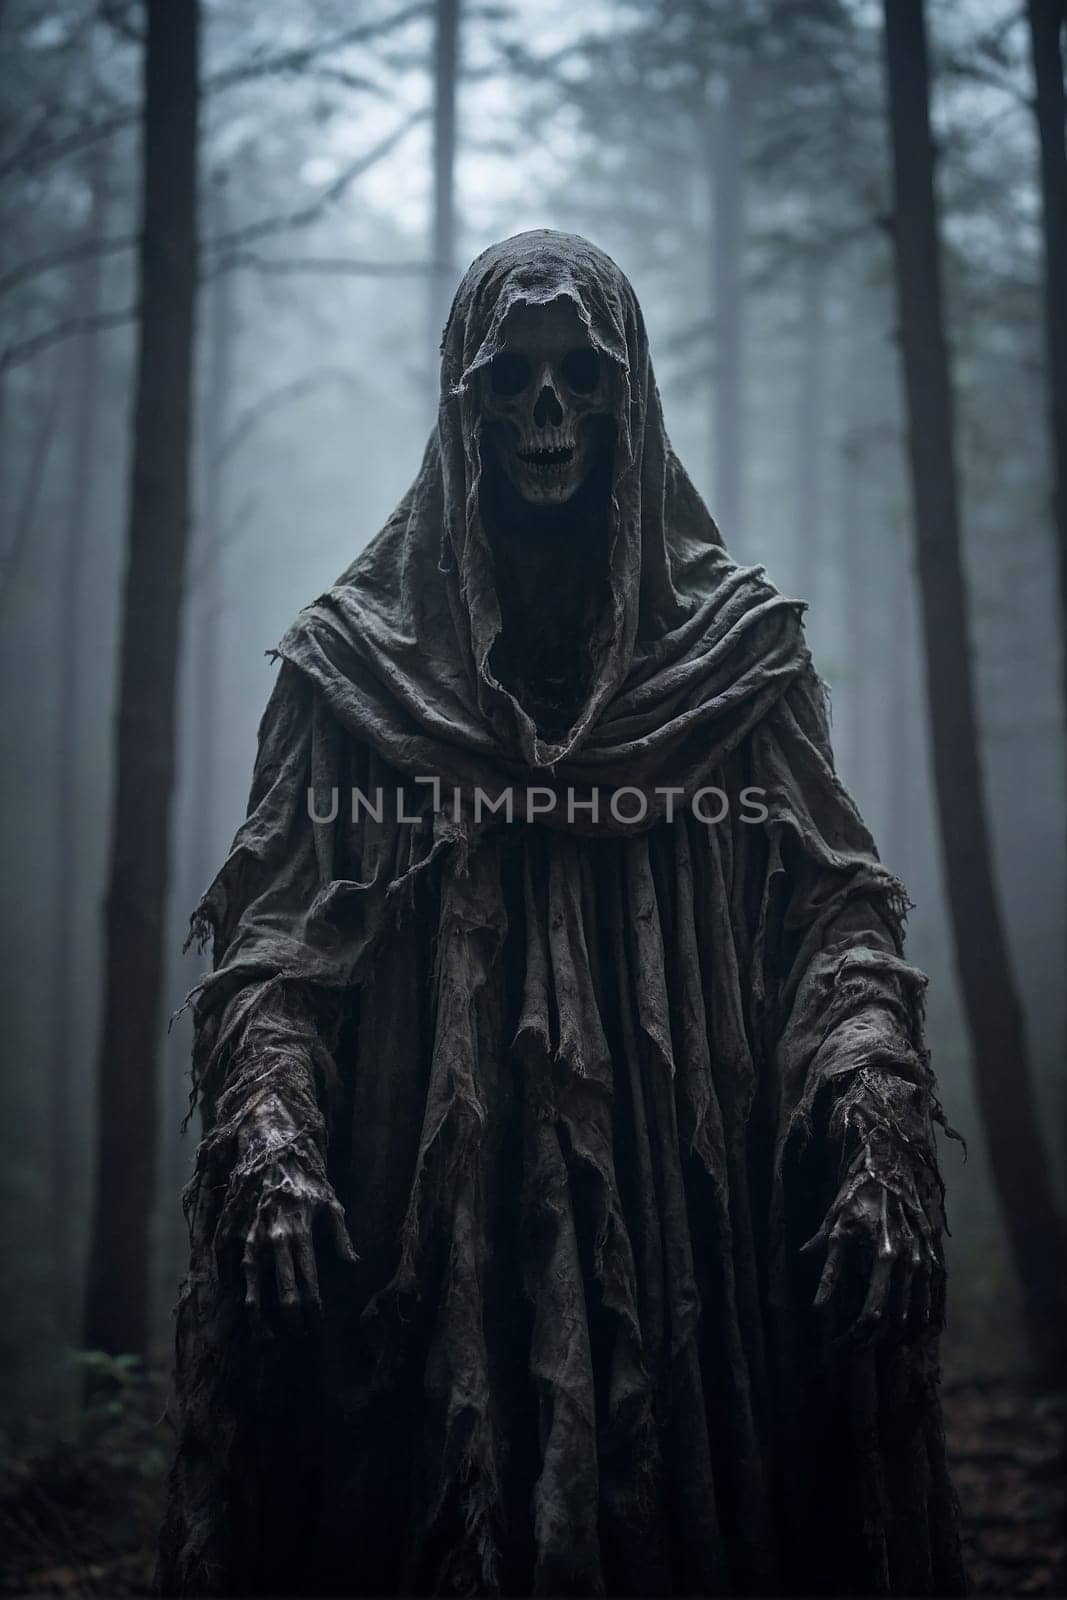 A spectral figure stands amidst the trees in a haunting scene captured deep within the forest.